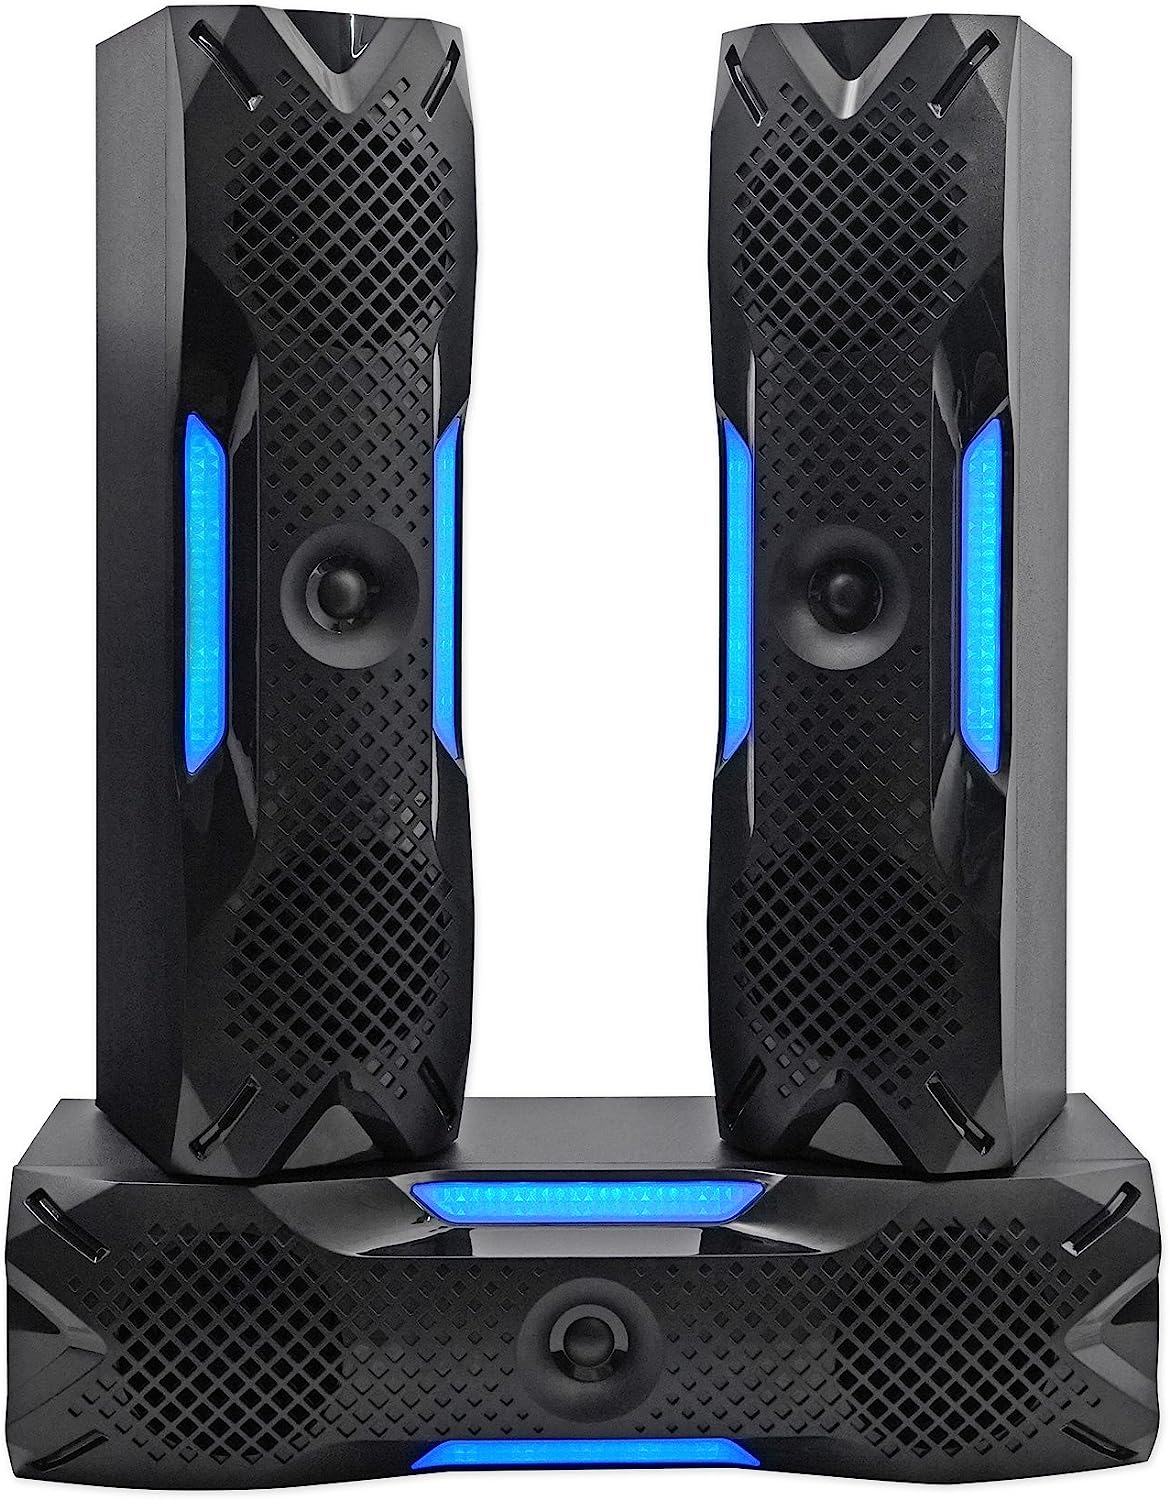 Rockville HTS56 1000w 5.1 Channel Home Theater System/Bluetooth/USB+8